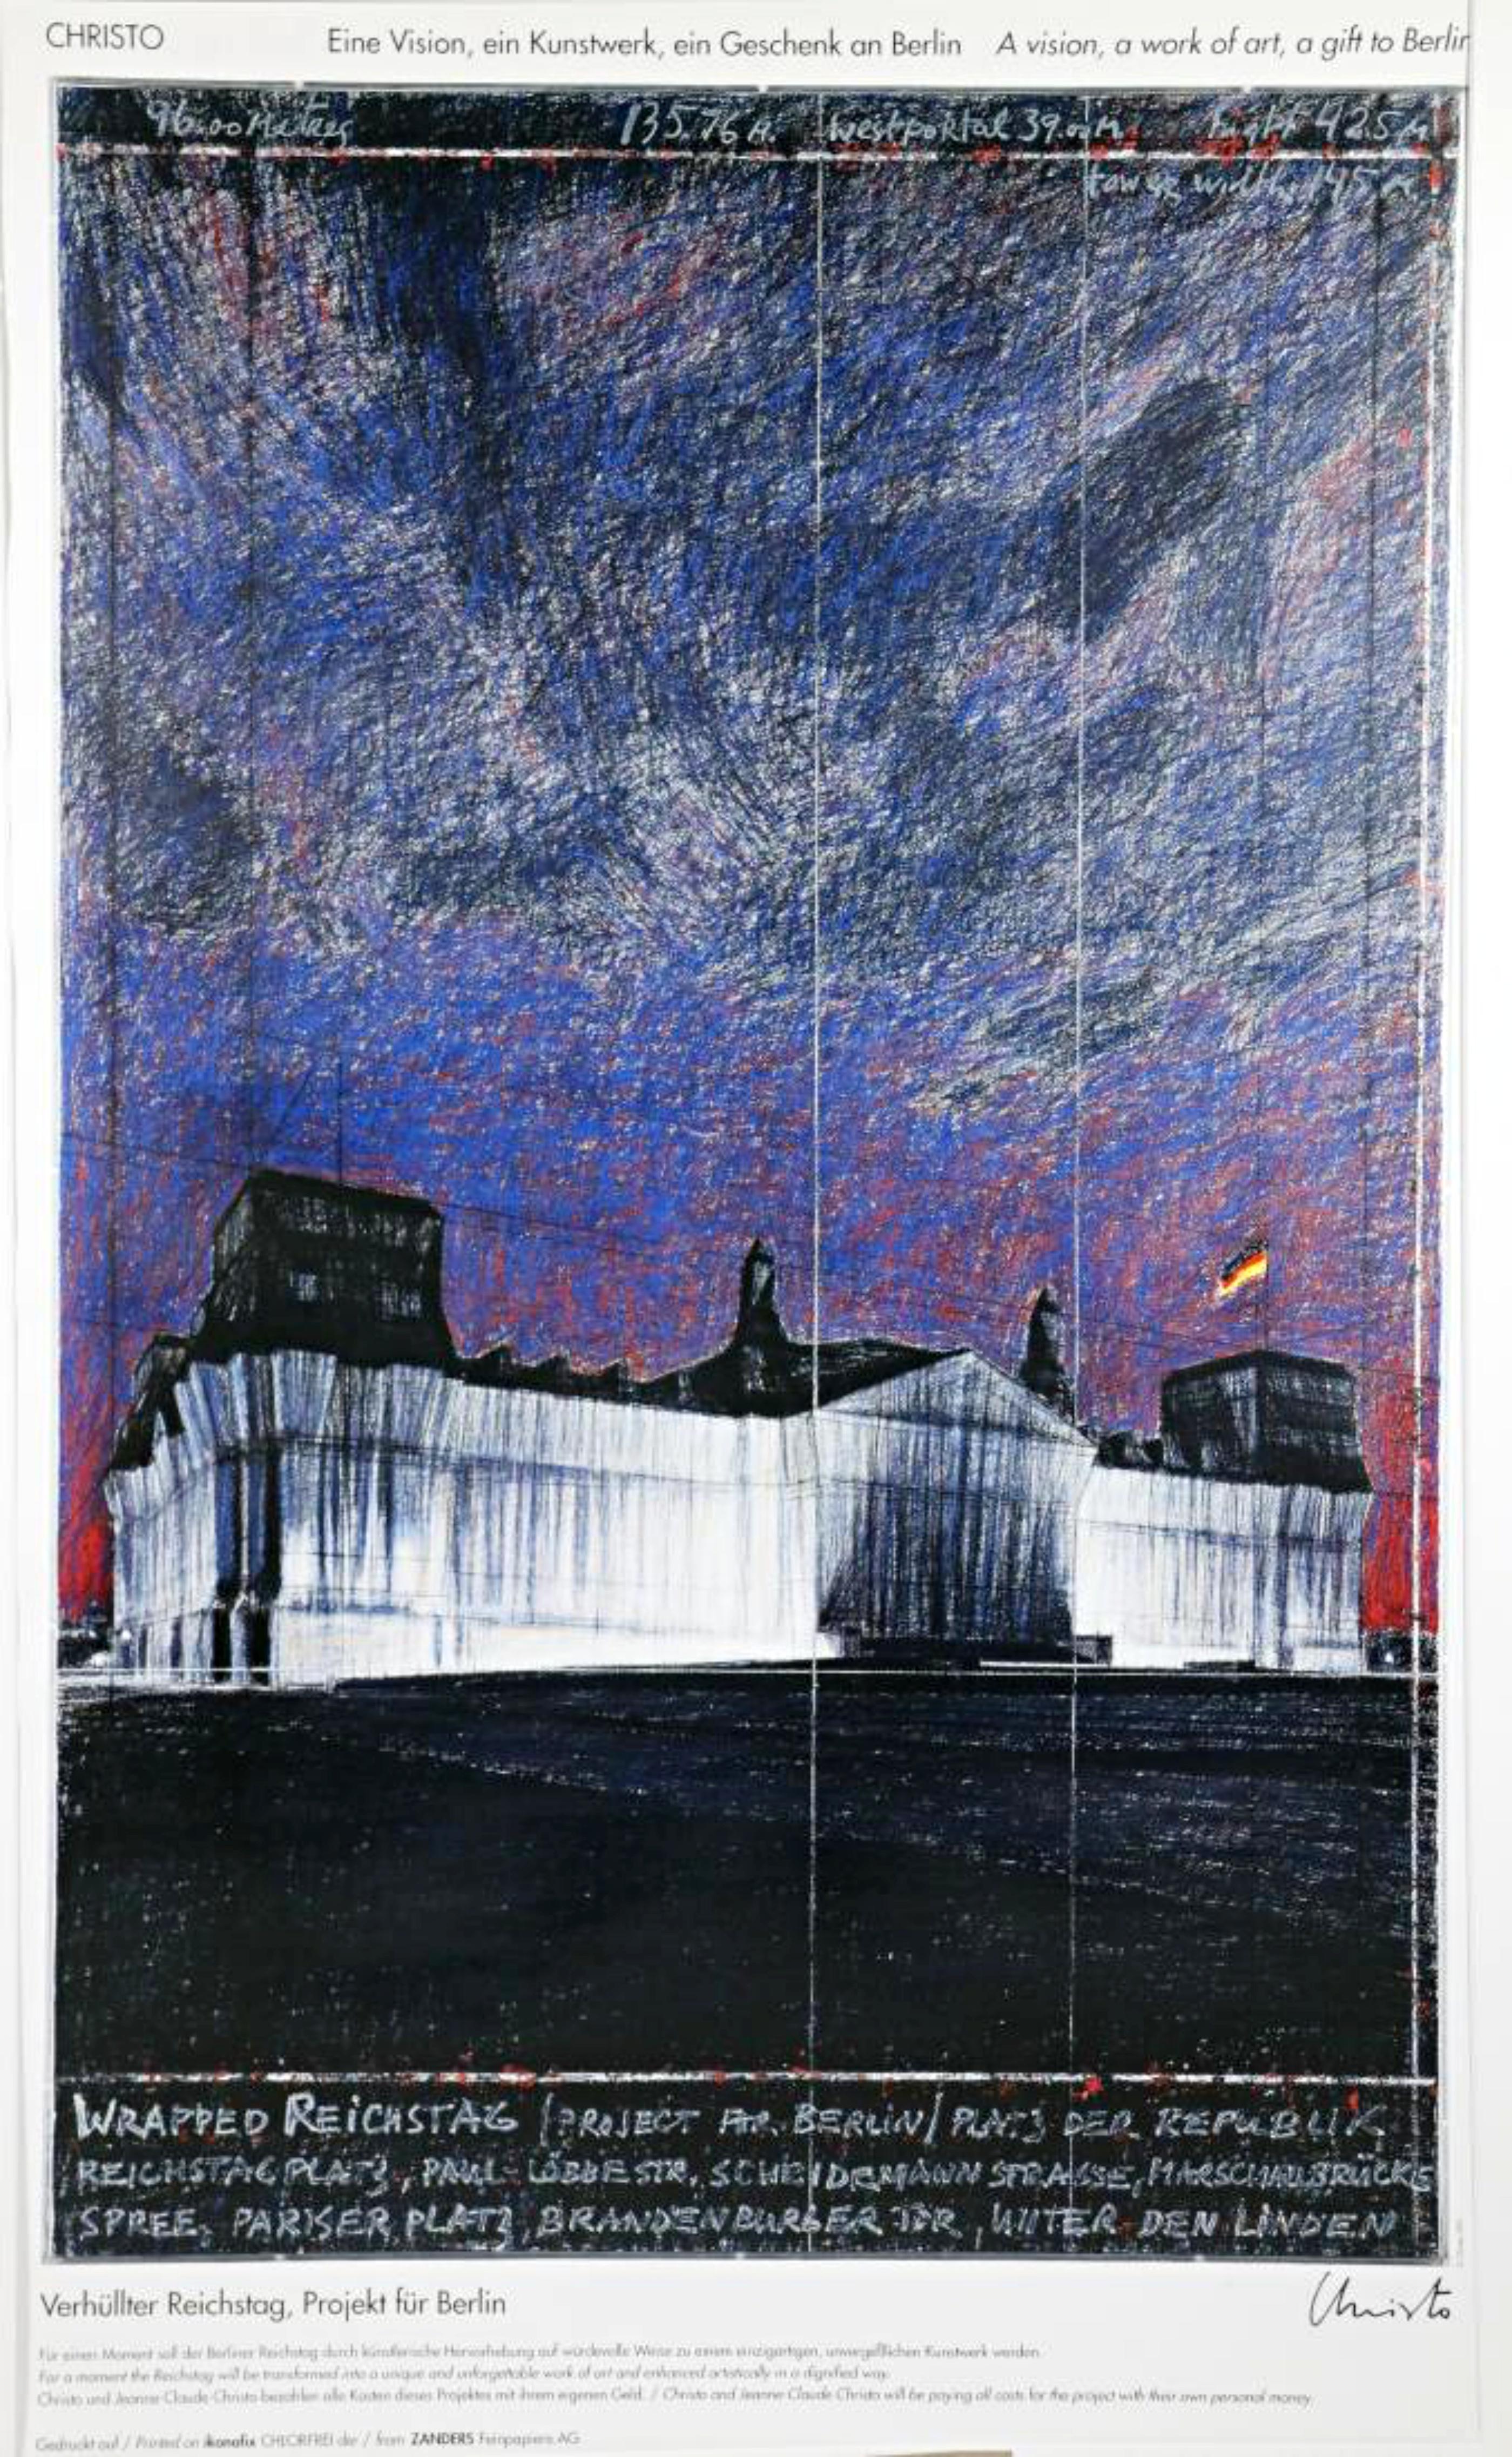 The Wrapped Reichstag at Night (Hand Signed) - Print by Christo